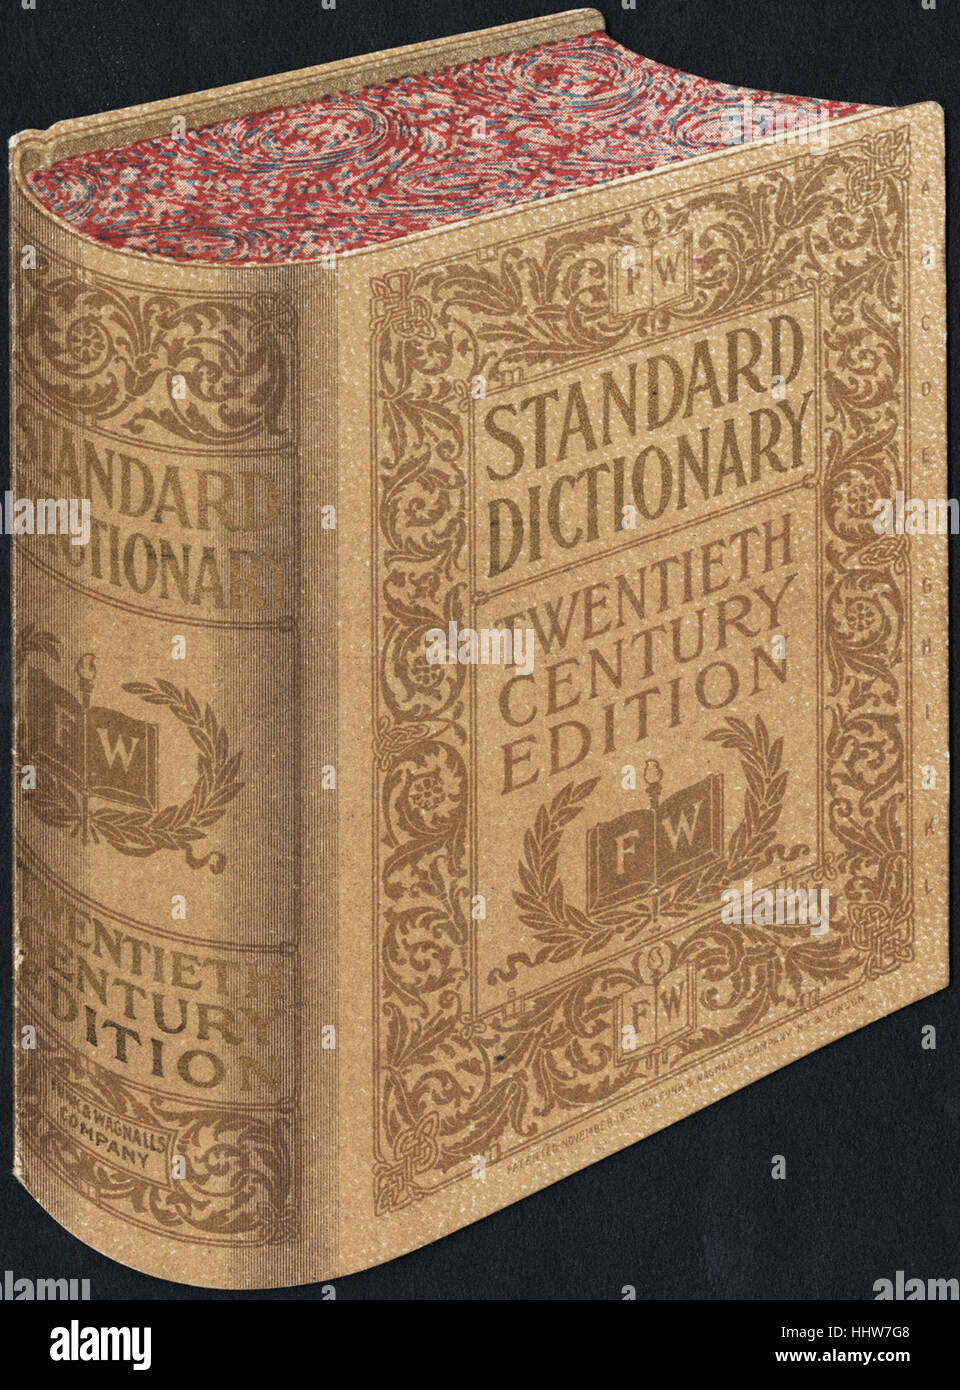 Standard Dictionary, twentieth century edition. [front]  - Leisure, Reading, and Travel Trade Cards Stock Photo